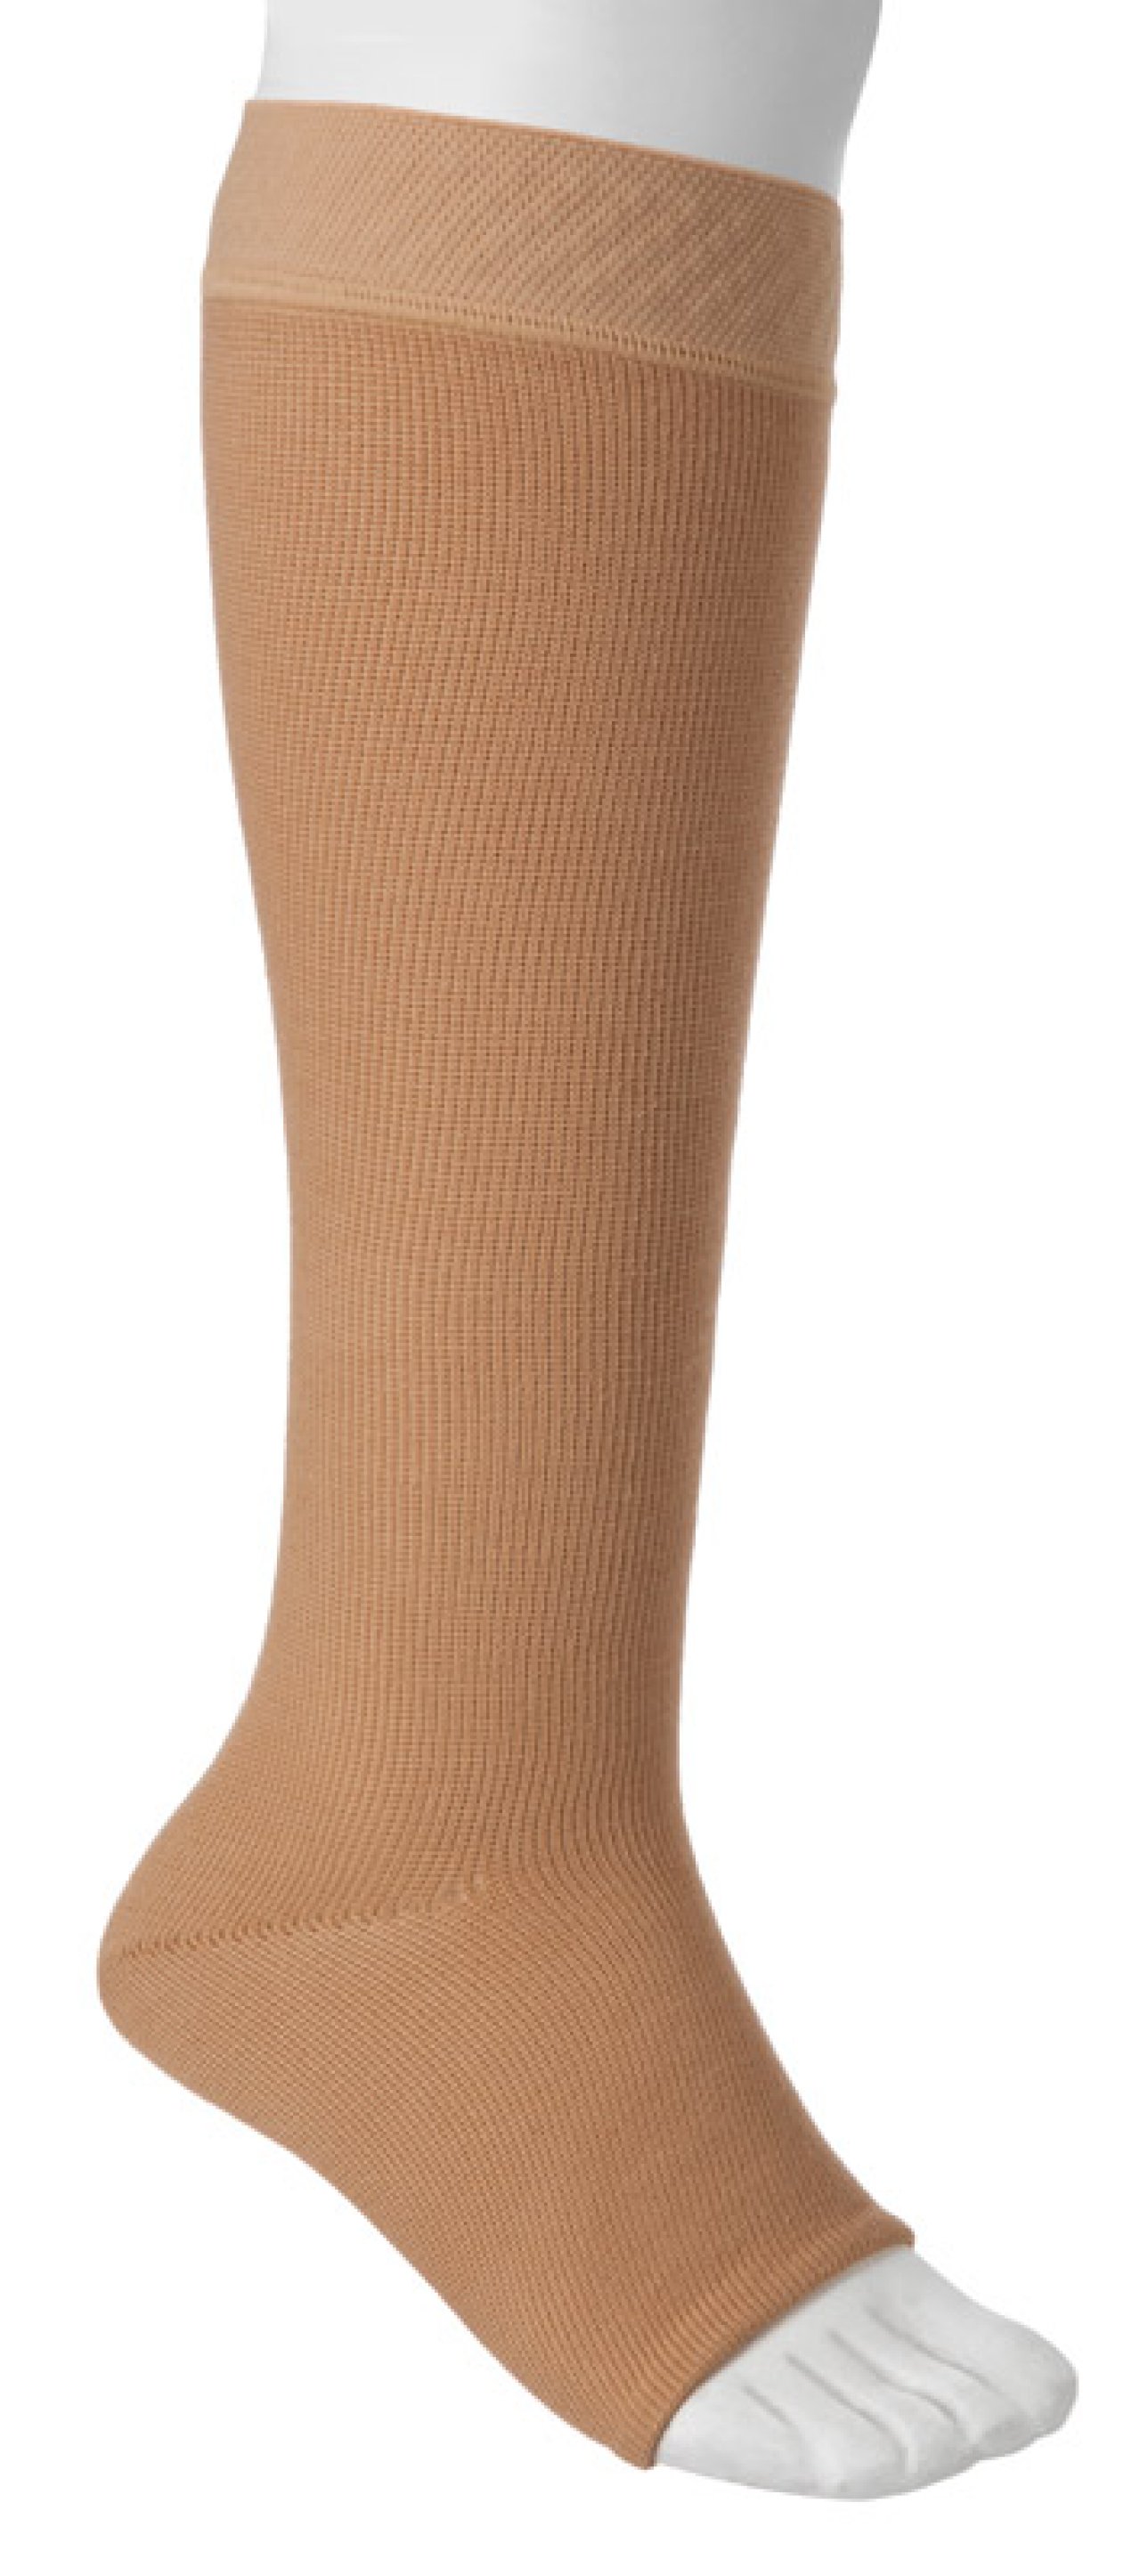 Made to Measure Below Knee Compression Sock